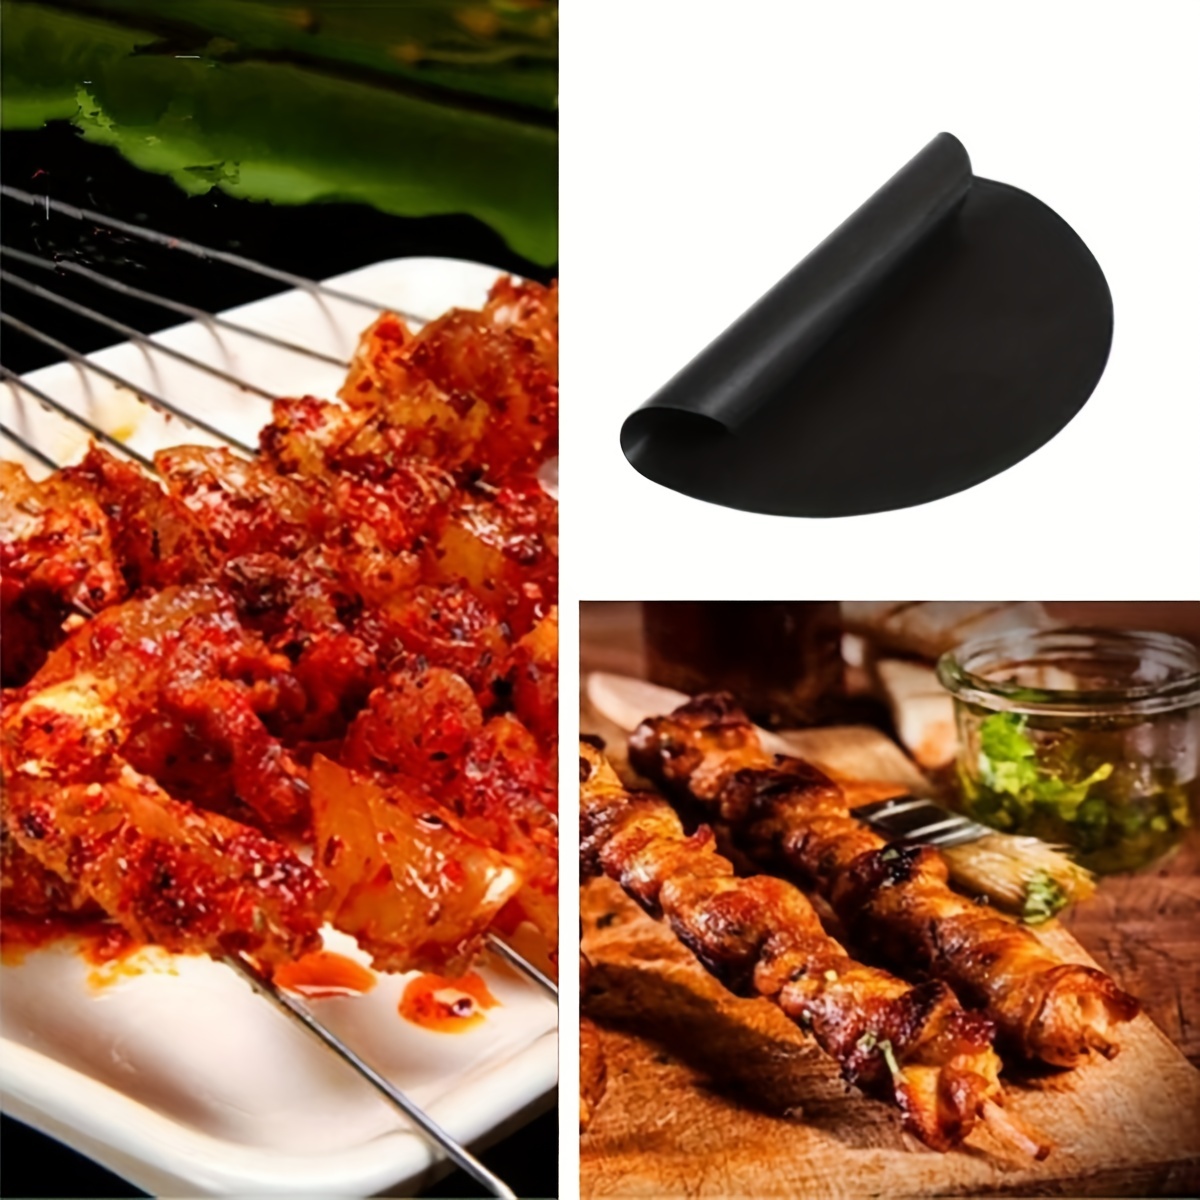 5PCS Non-stick BBQ Grill Mat Baking Pad Teflon Cooking Plate Barbecue Party  Tool